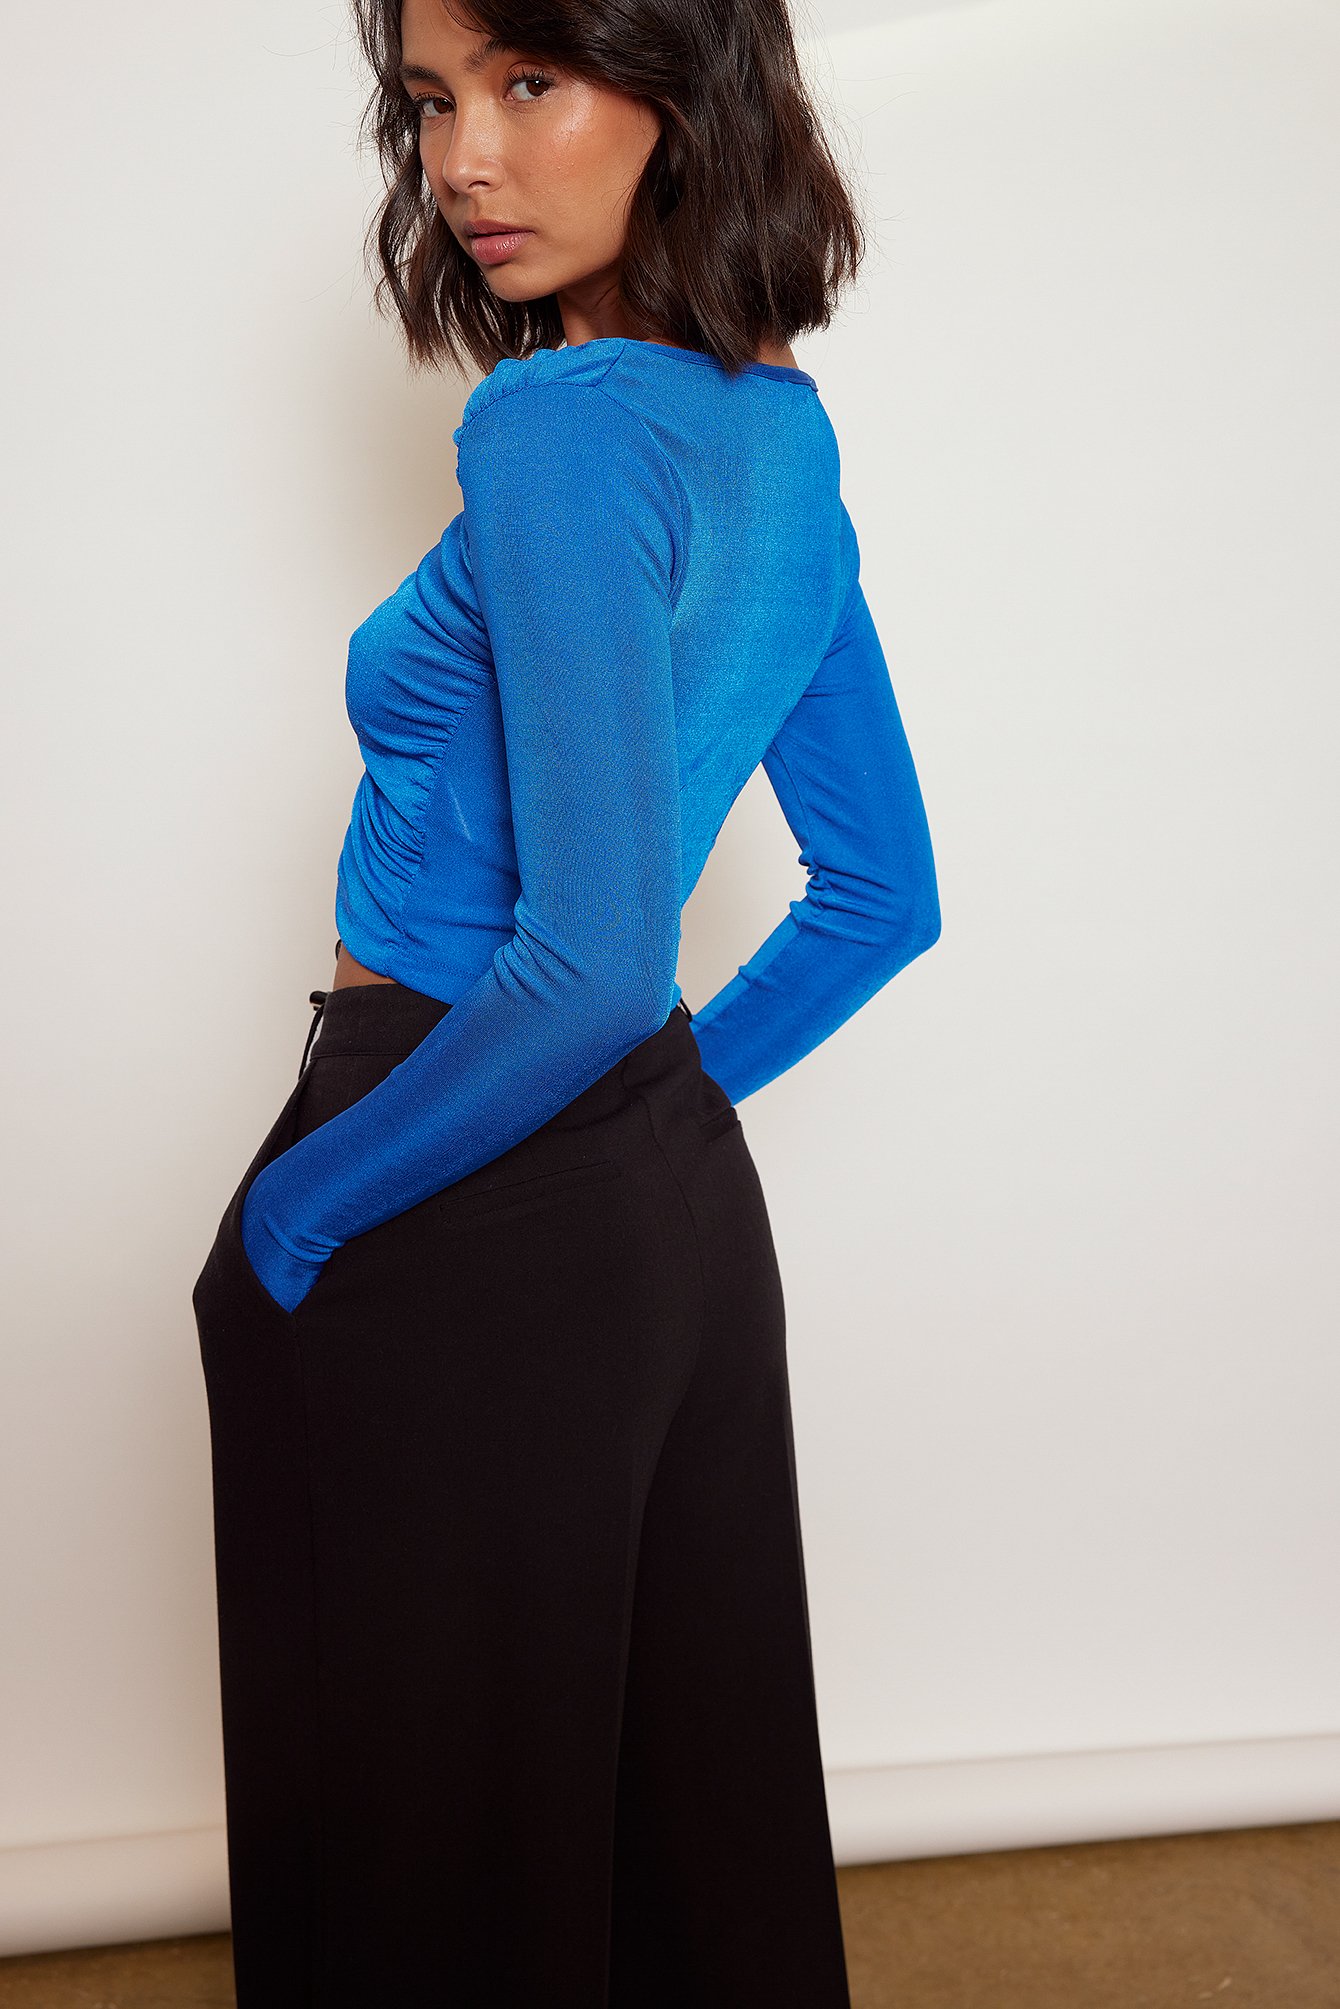 Blue Shiny Rouched Closure Top